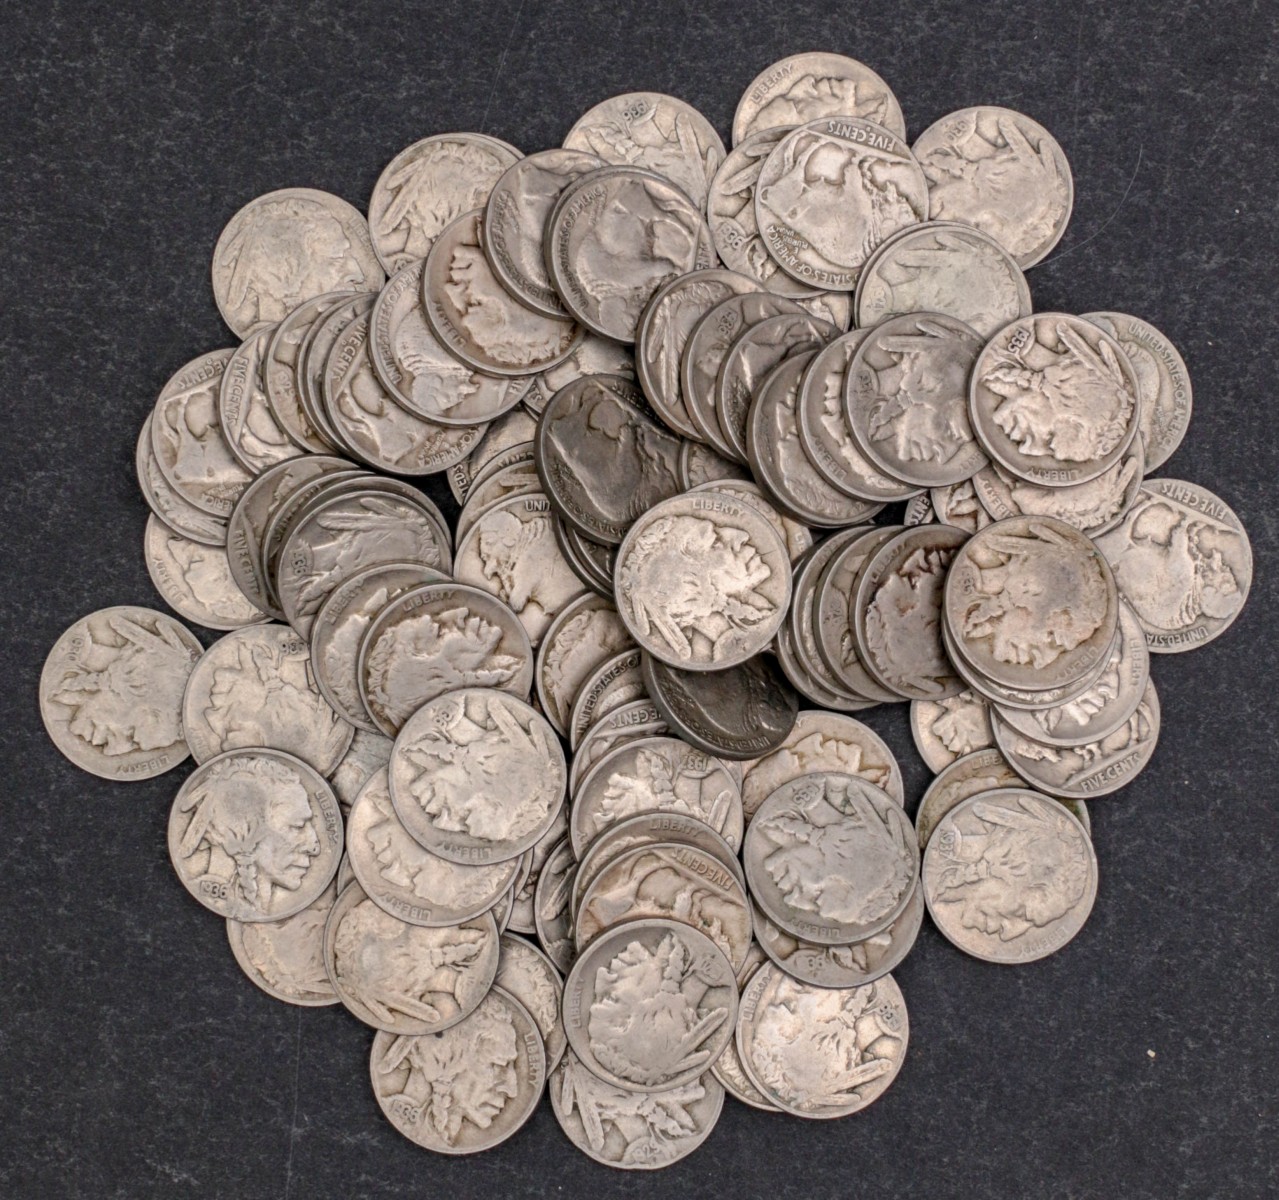 295 BUFFALO NICKELS WITH FAINT DATE